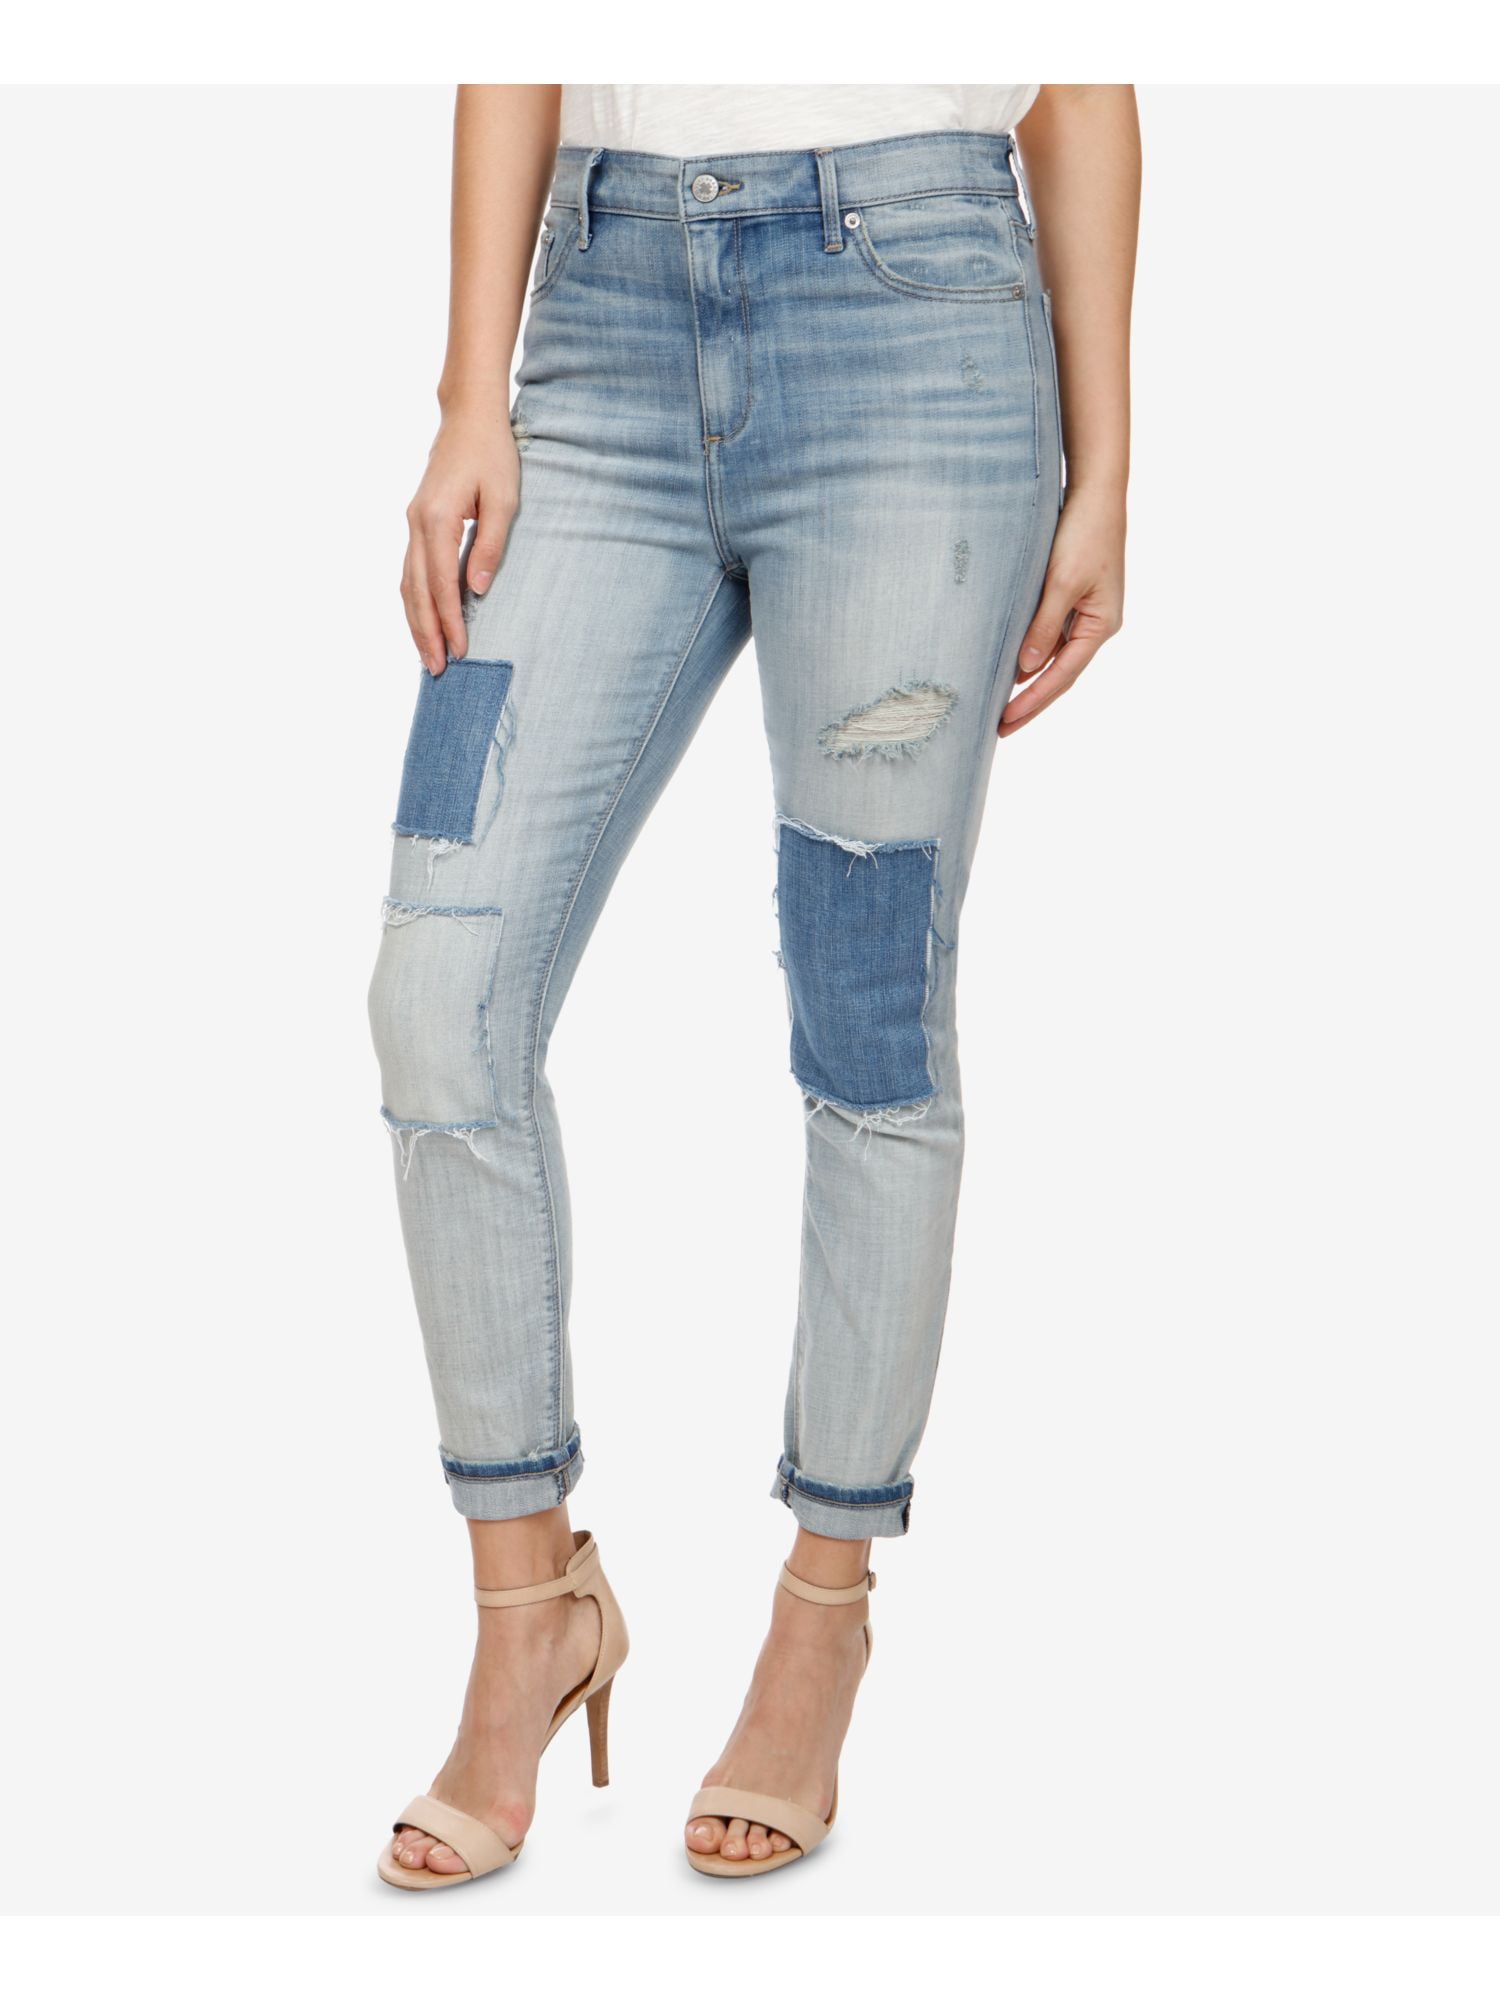 lucky brand jeans fit guide womens